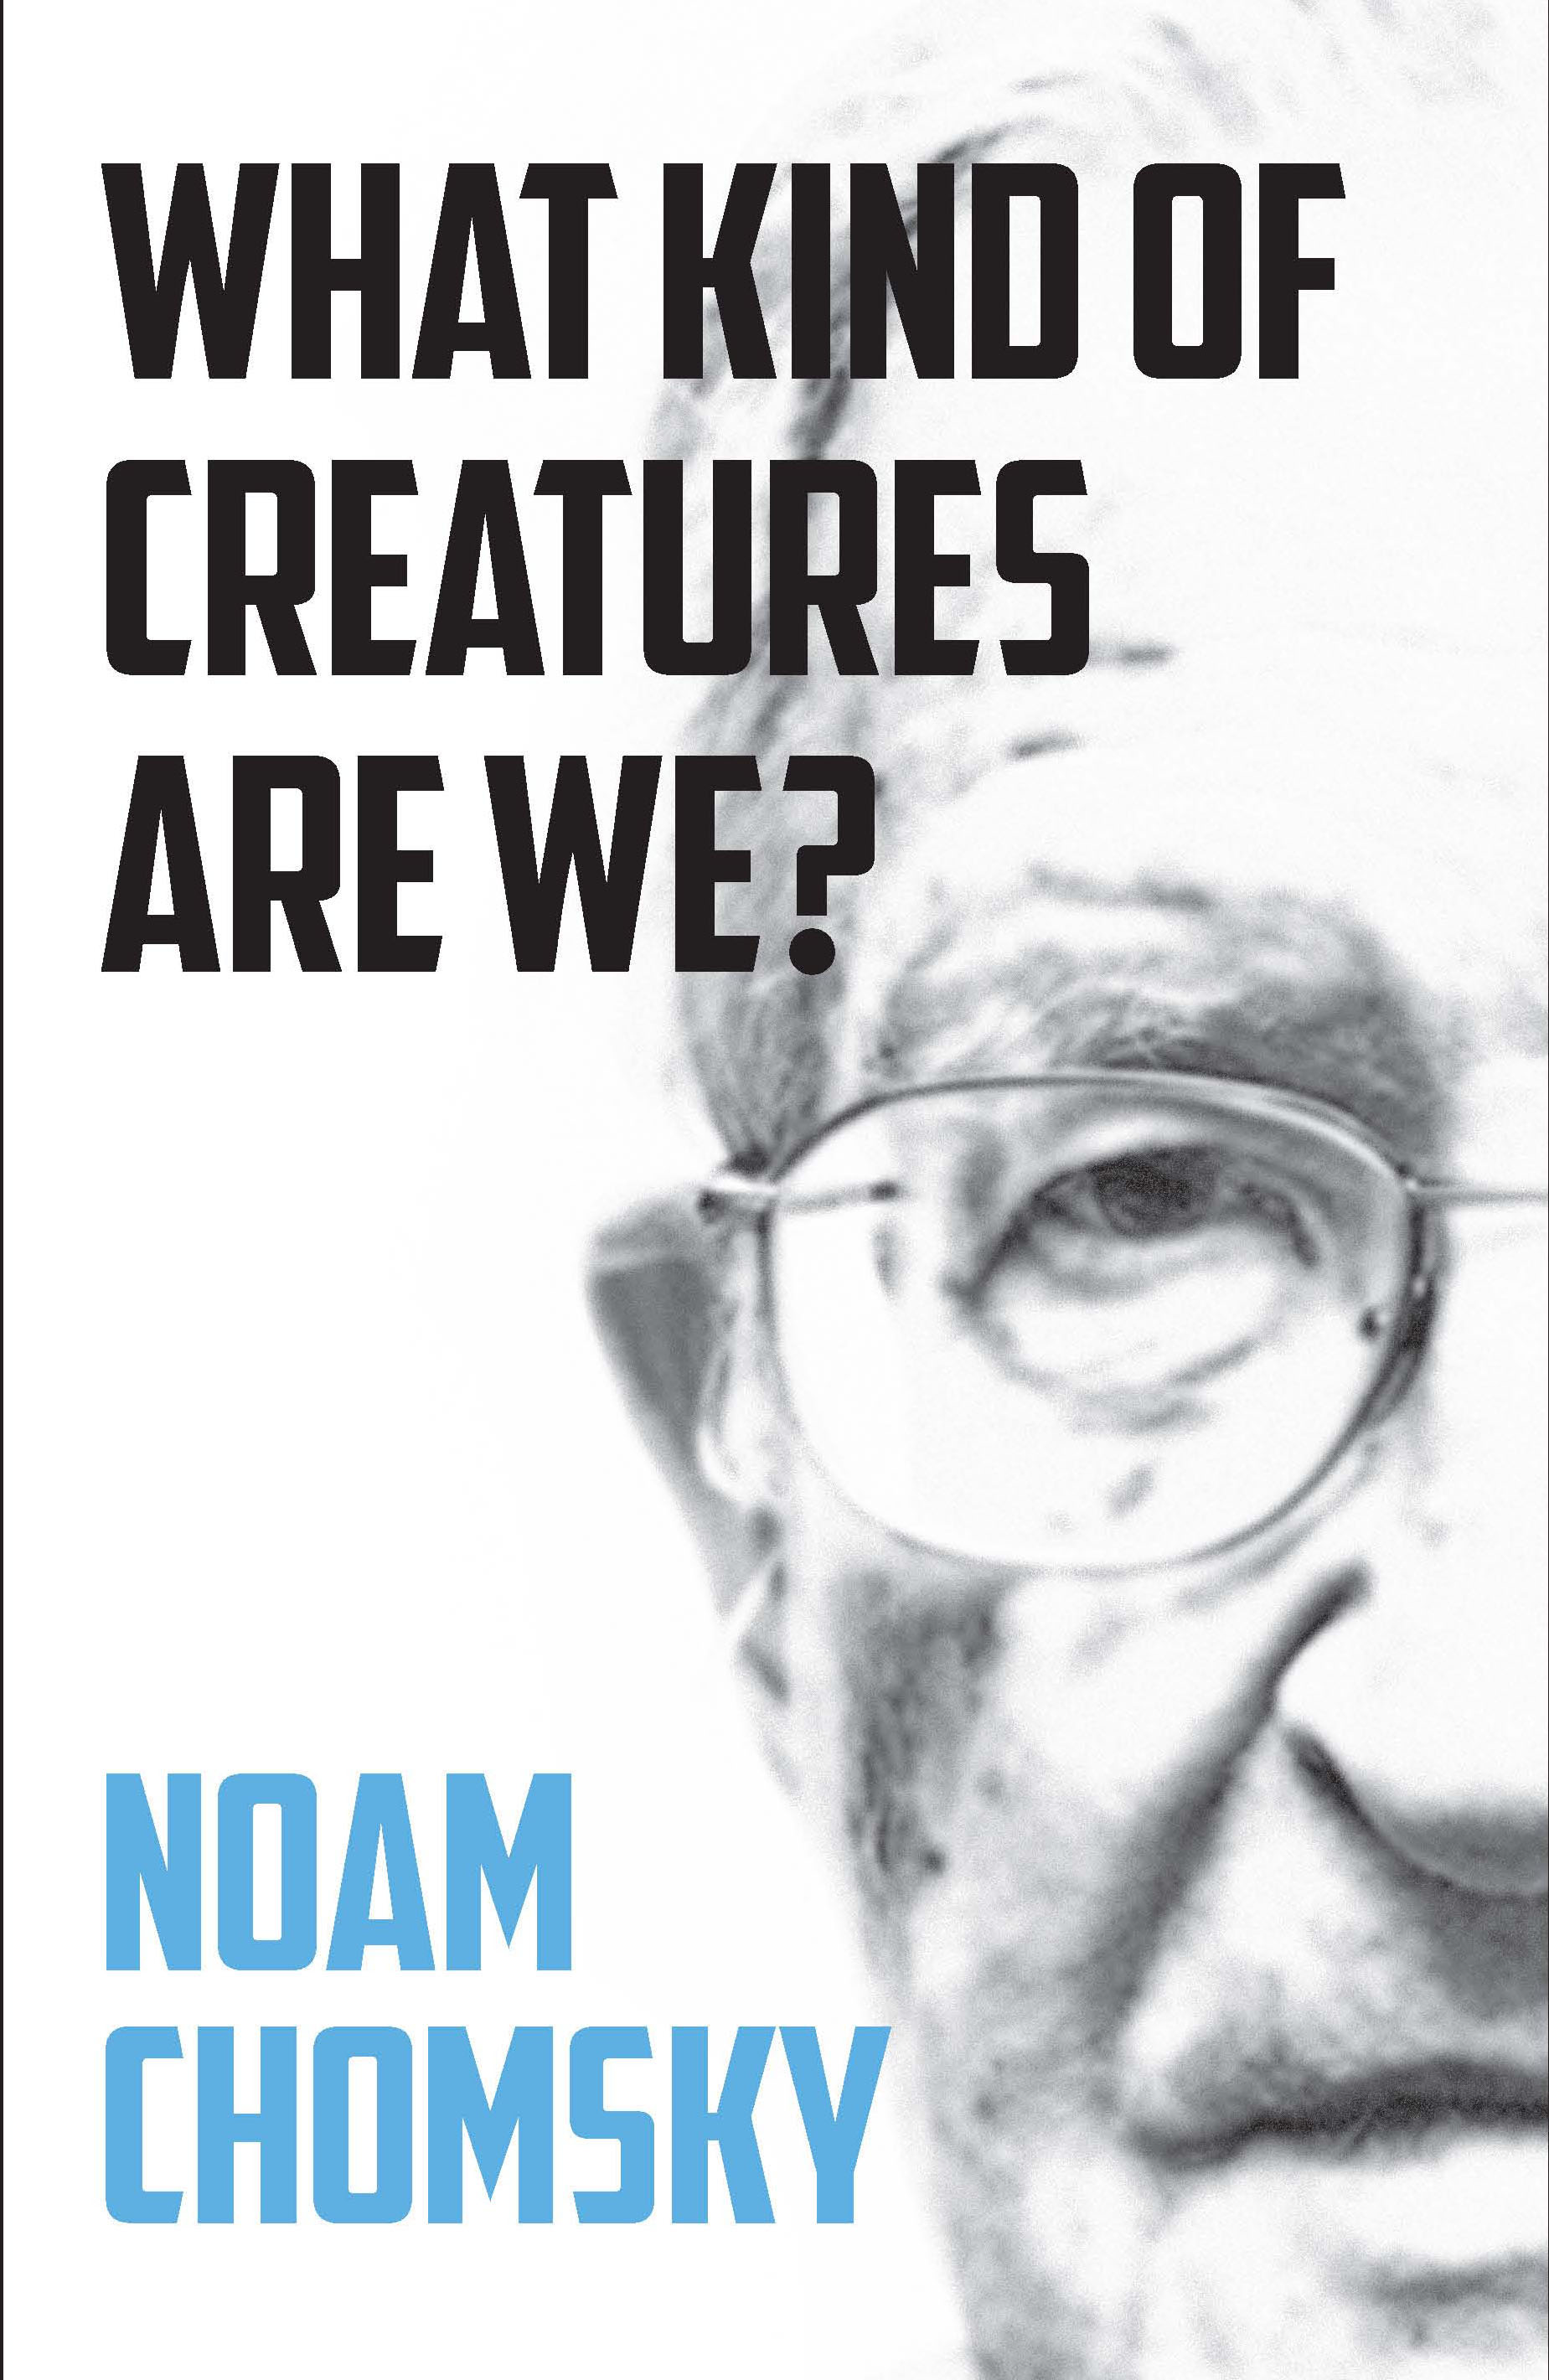 An interview with Noam Chomsky on his book 'What Kind of Creatures Are We?' by Idan Landau